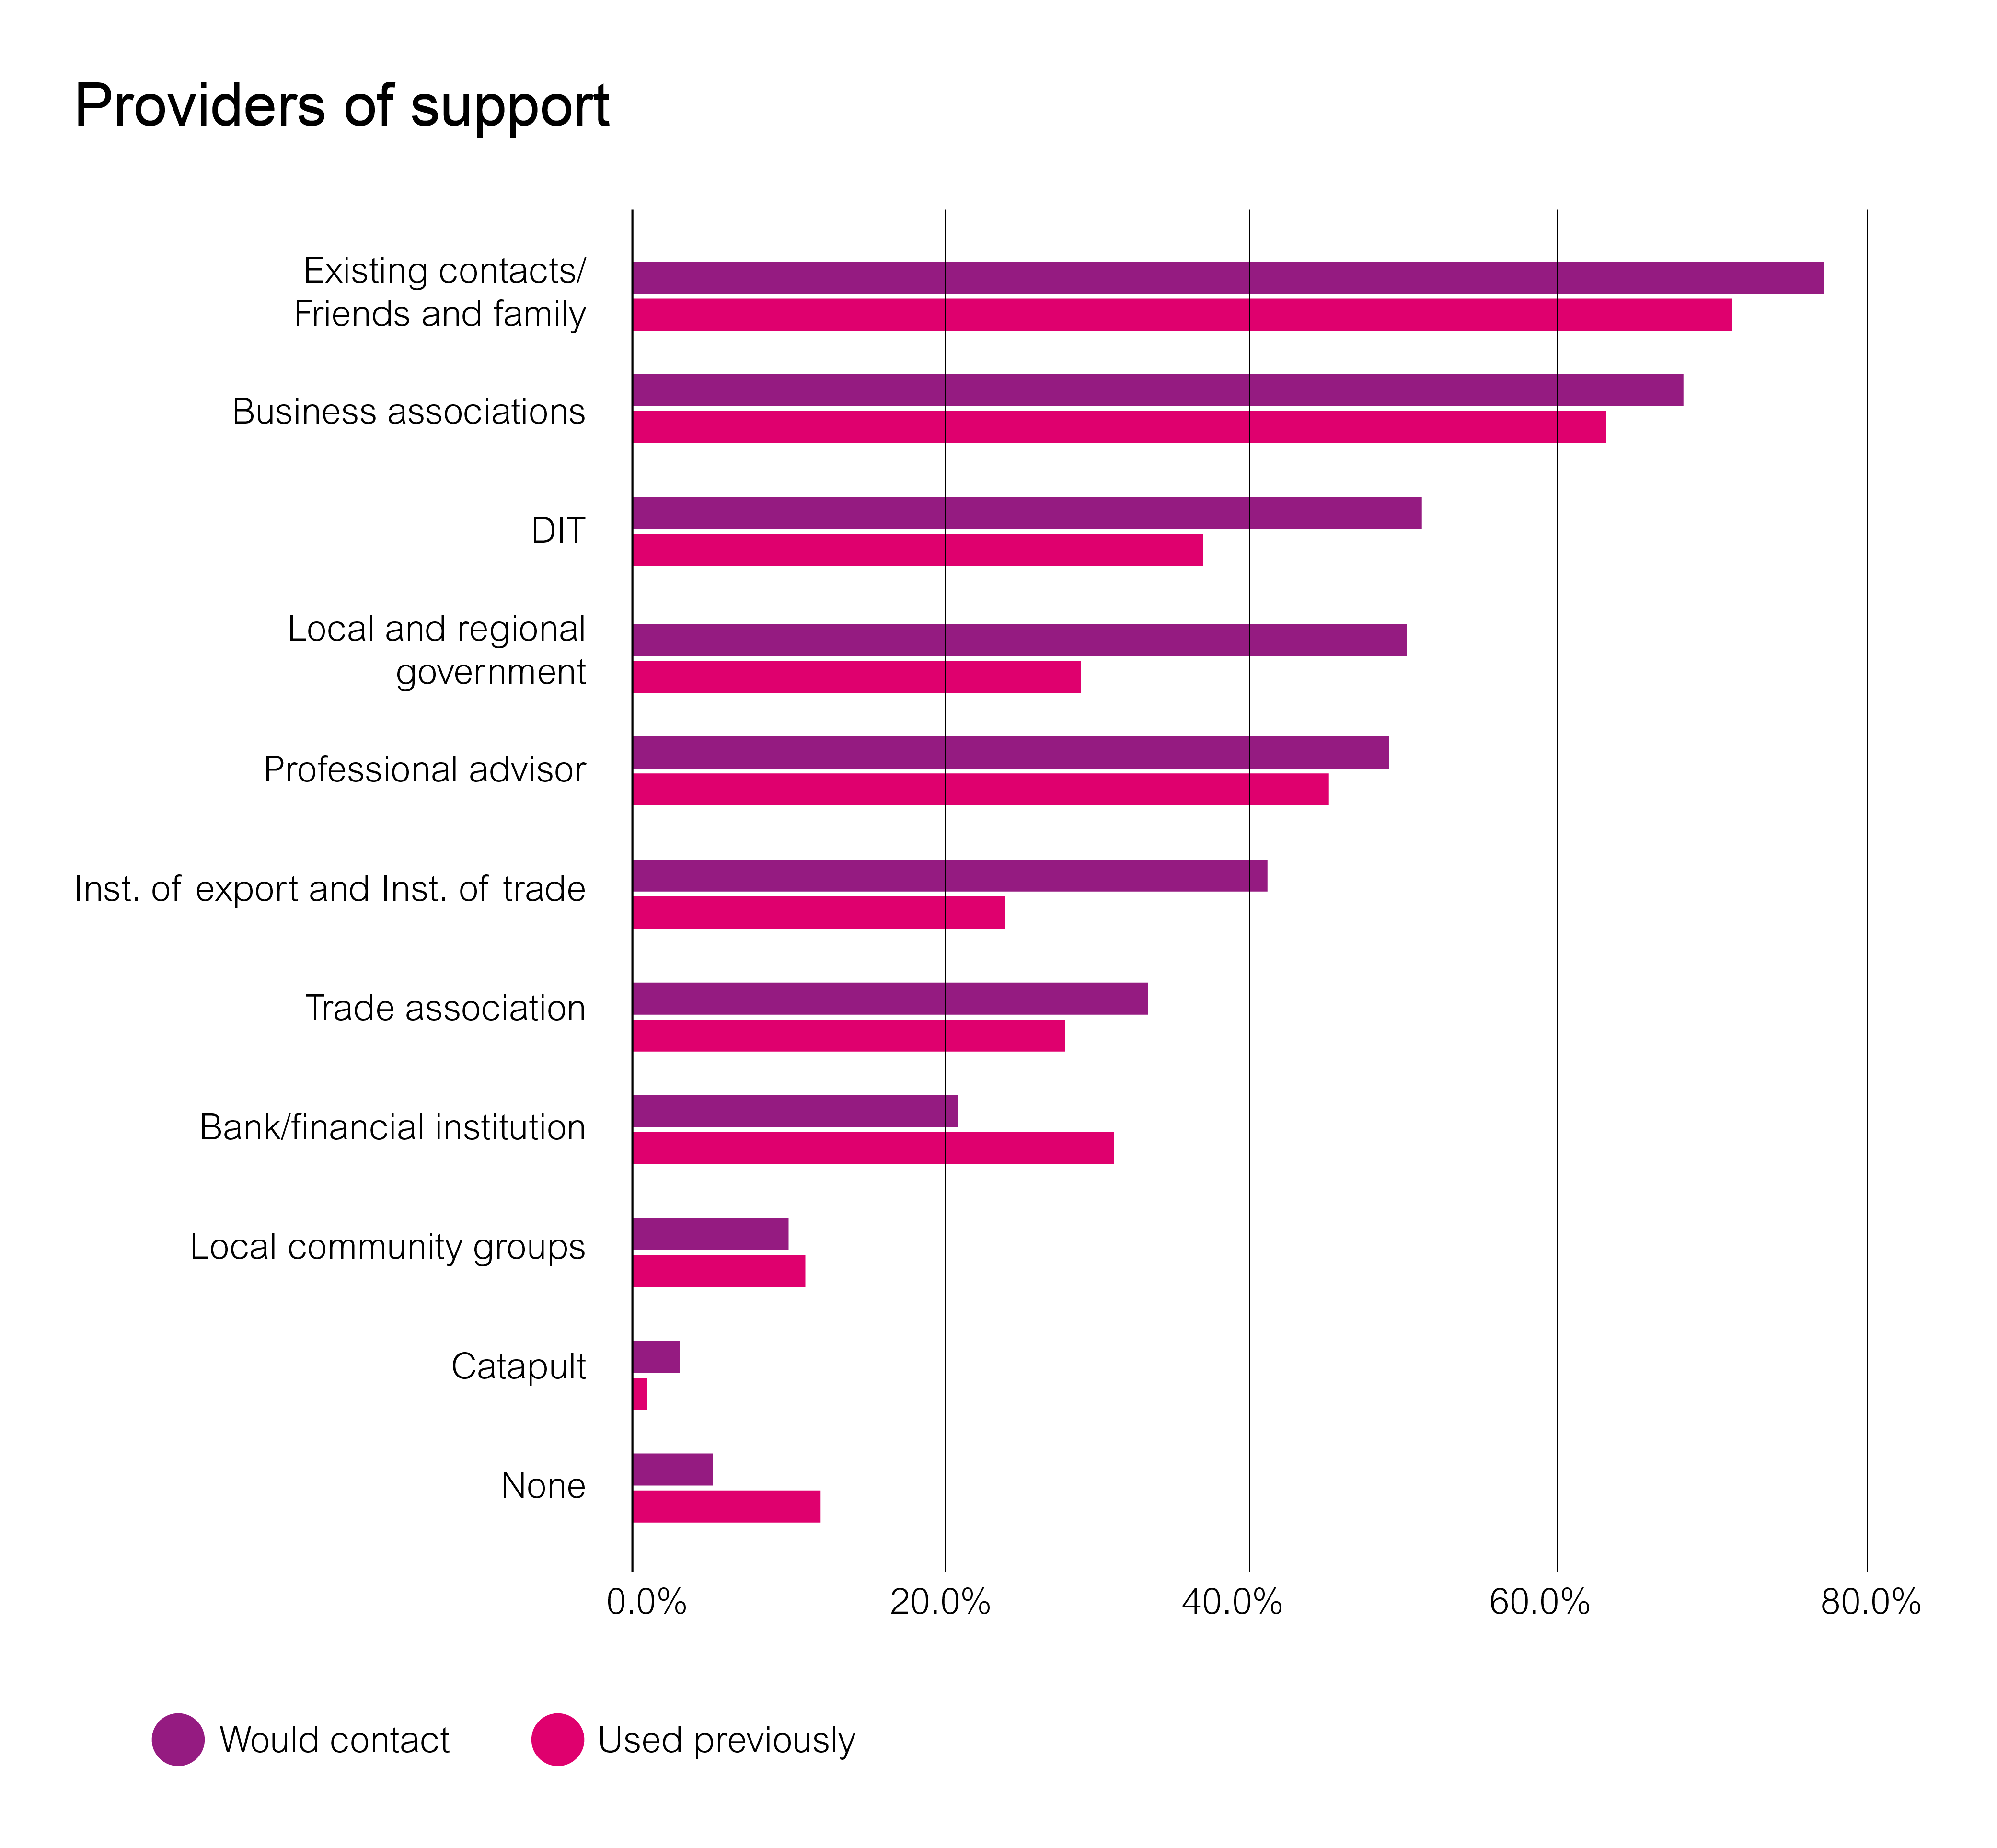 Providers of support